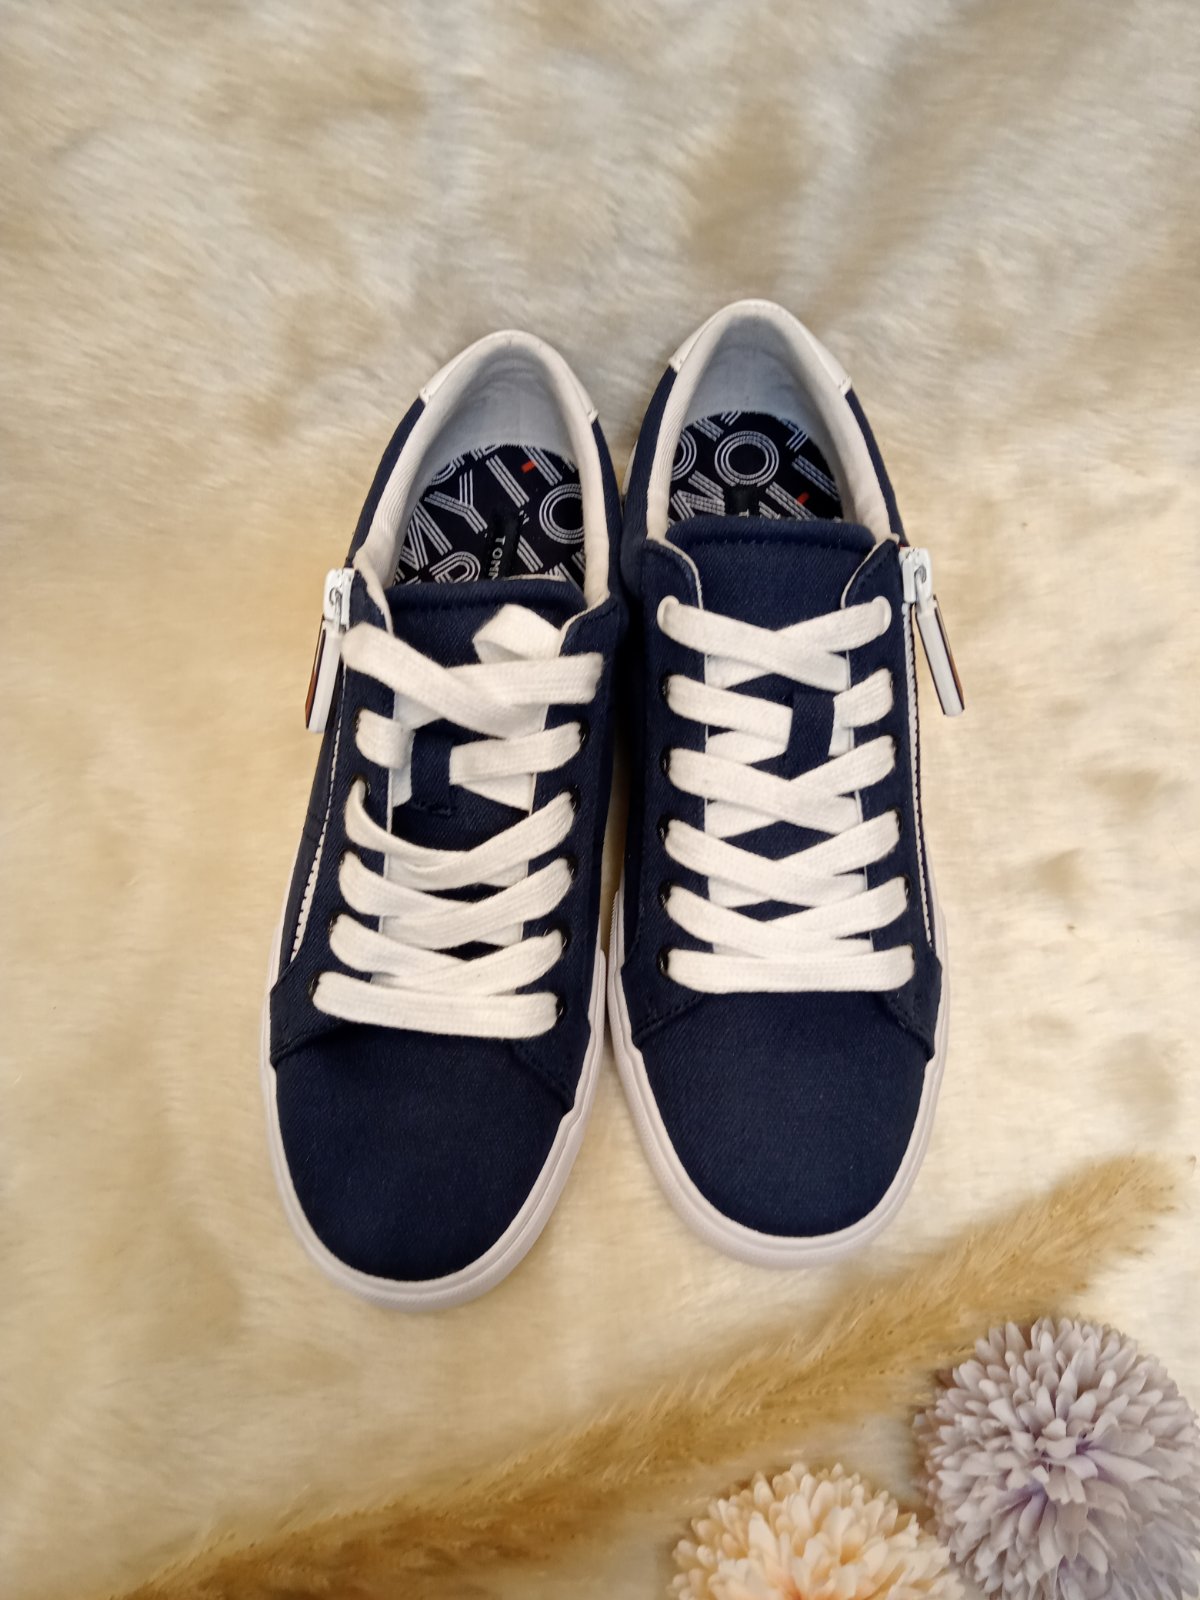 TOMMY HILFIGER SHOES FOR WOMEN'S PASKAL BLUE SIZE 7 - Curate